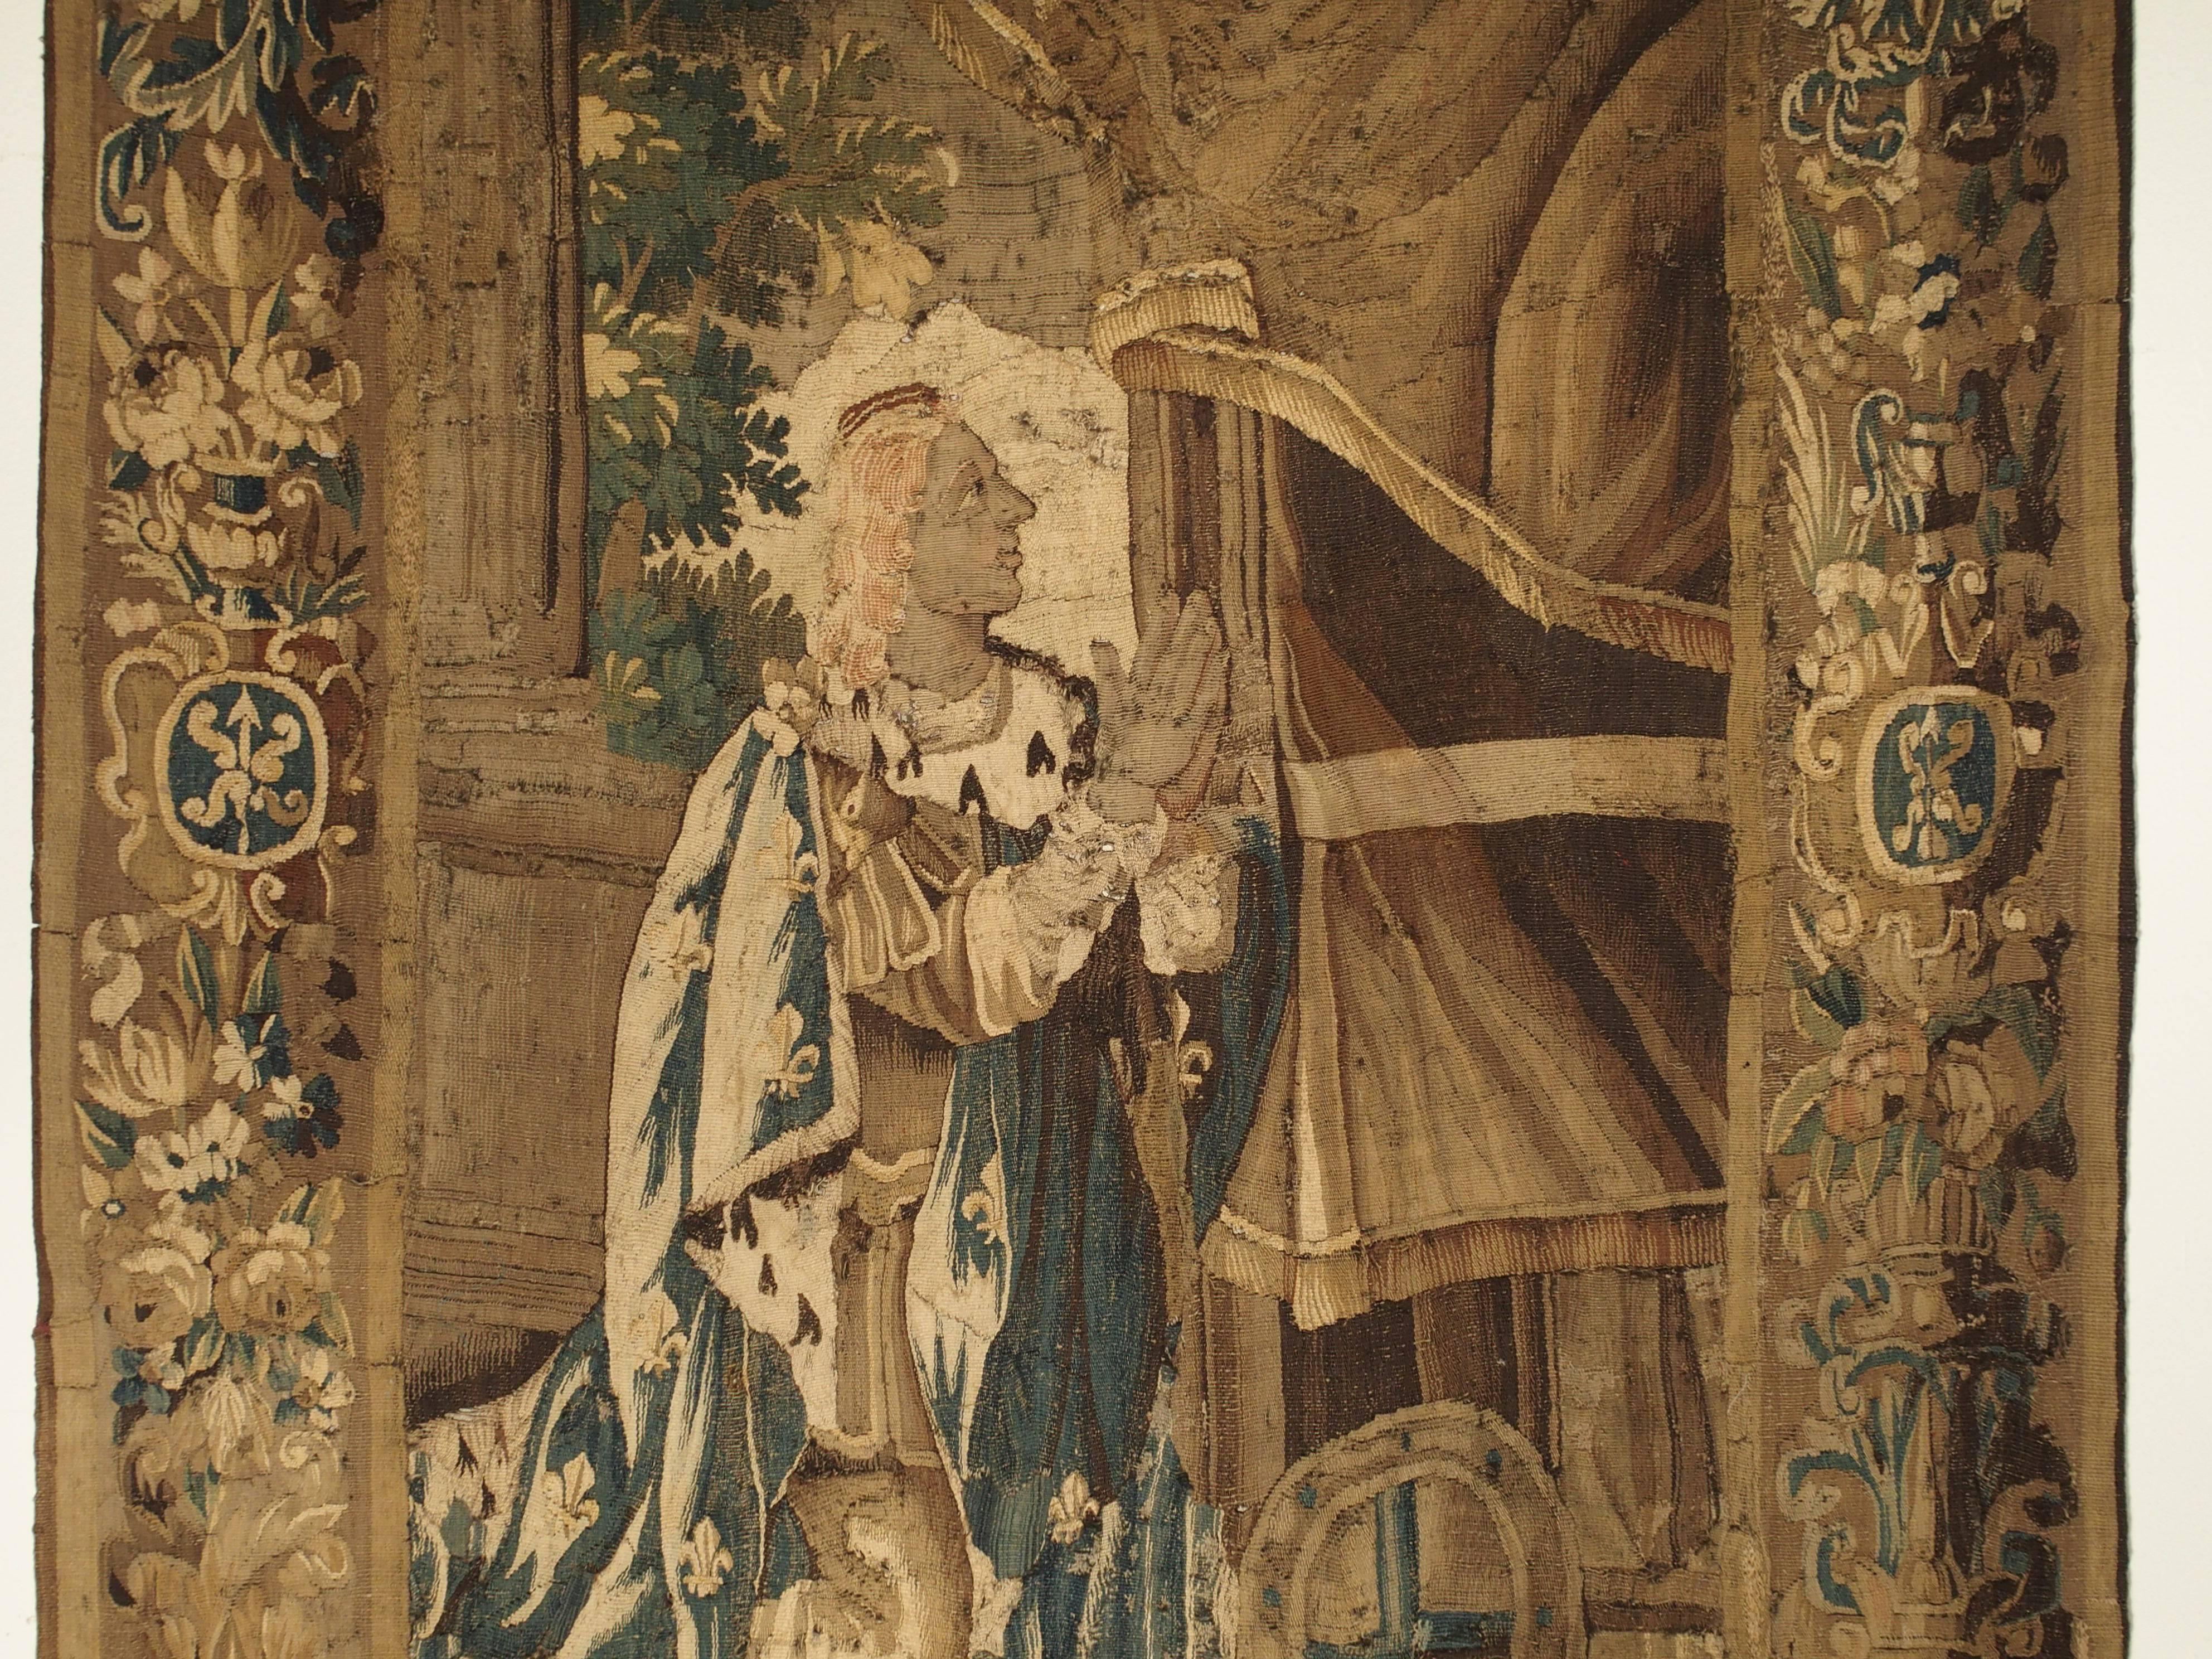 17th Century French Aubusson Tapestry Depicting the Coronation of a King, circa 1600